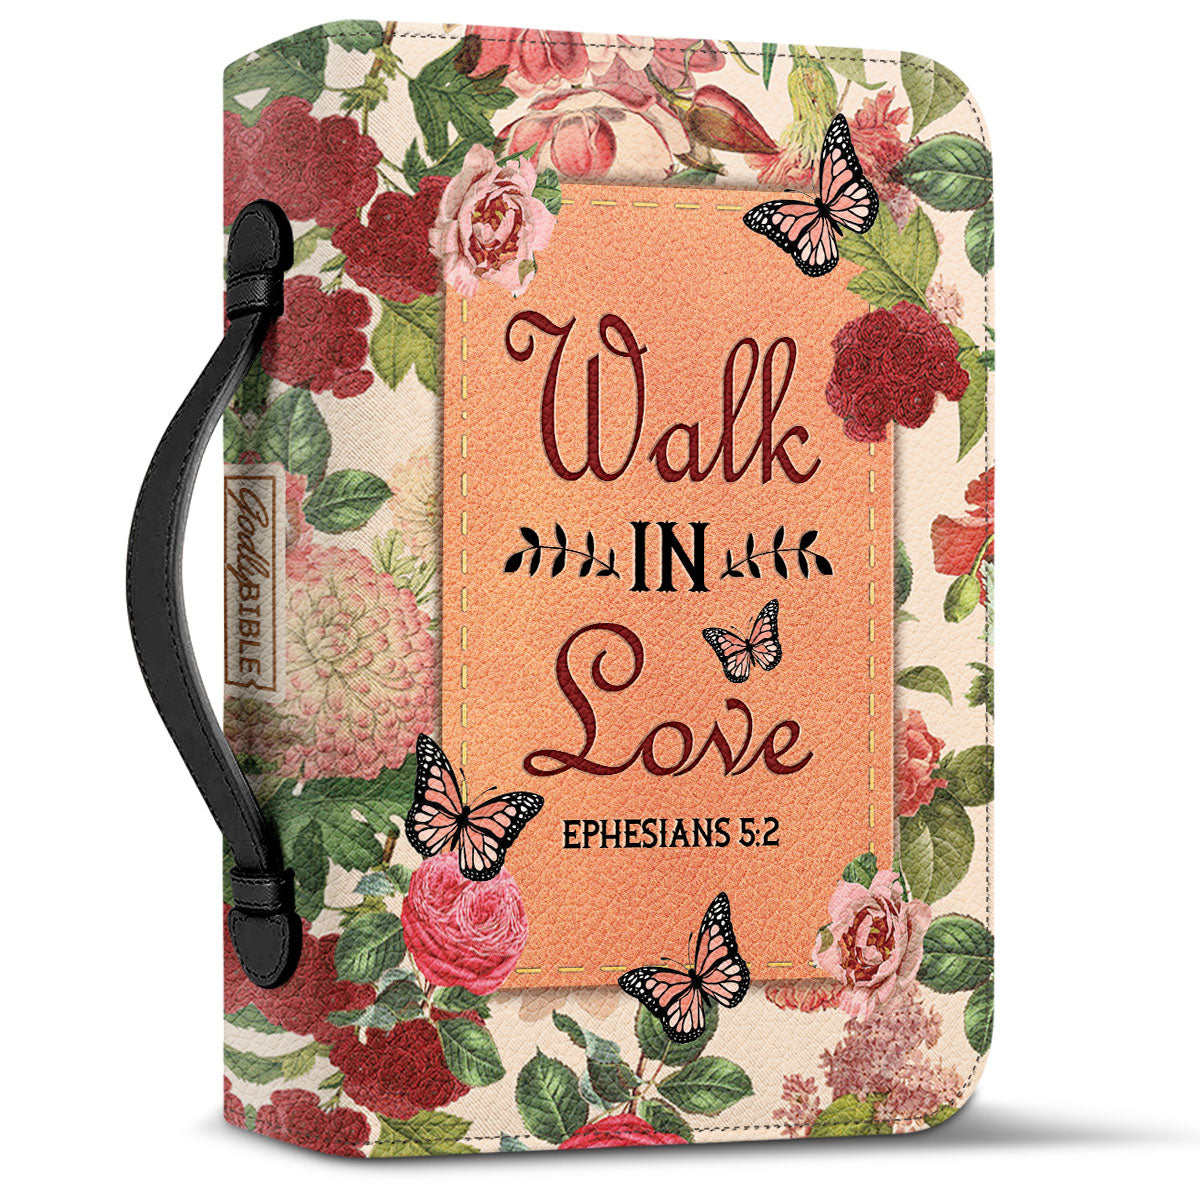 Walk In Love Ephesians 5 2 Personalized Bible Cover - Inspirational Bible Covers For Women